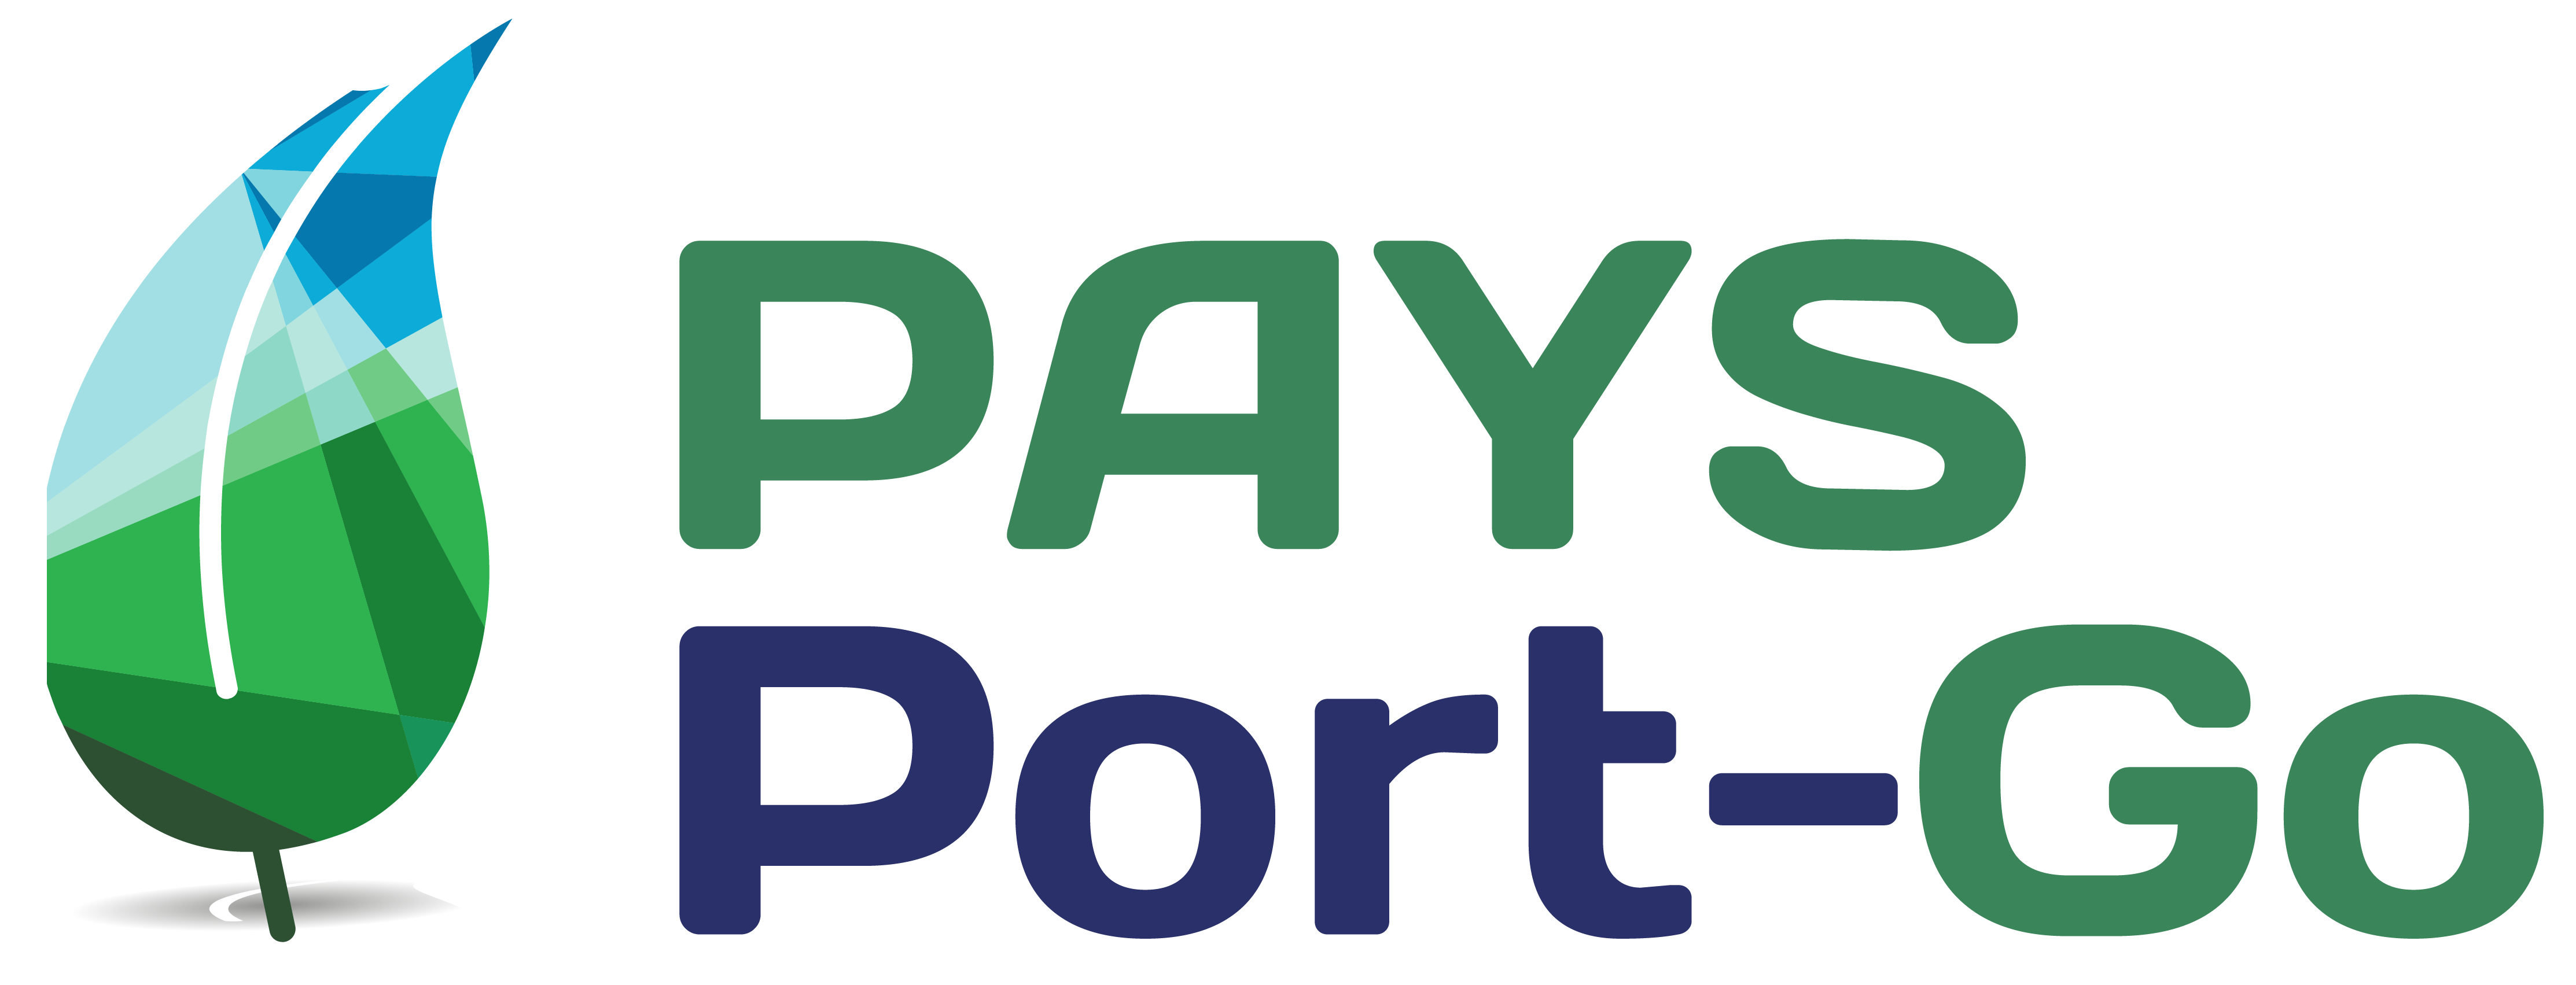 Small PAYSPort-GO logo, click to go to home page.